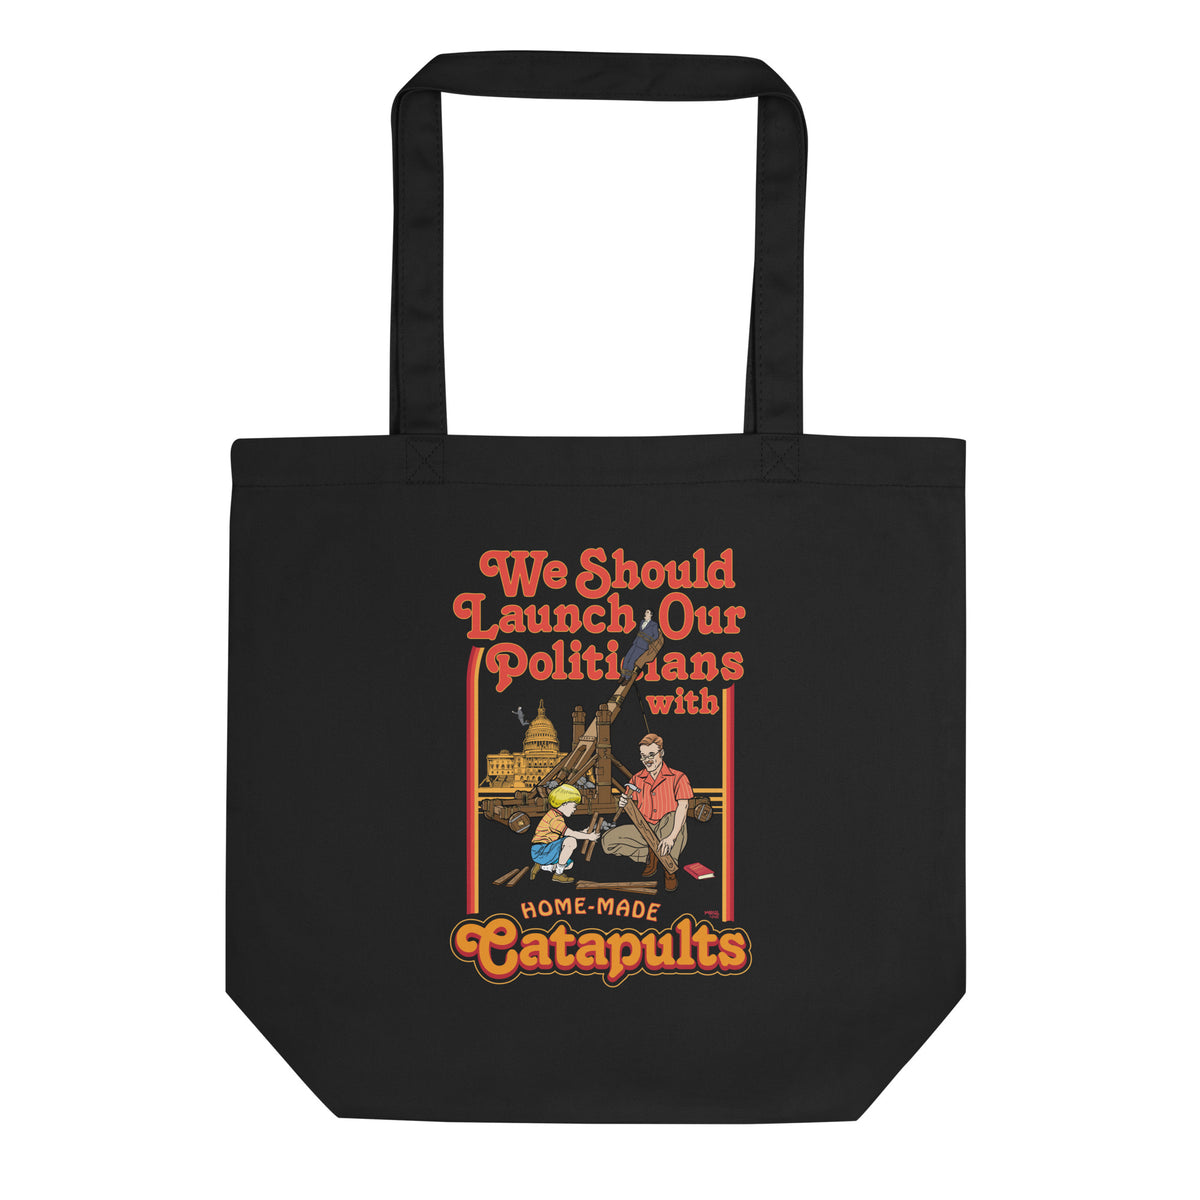 We Should Launch Our Politicians from Catapults Eco Tote Bag